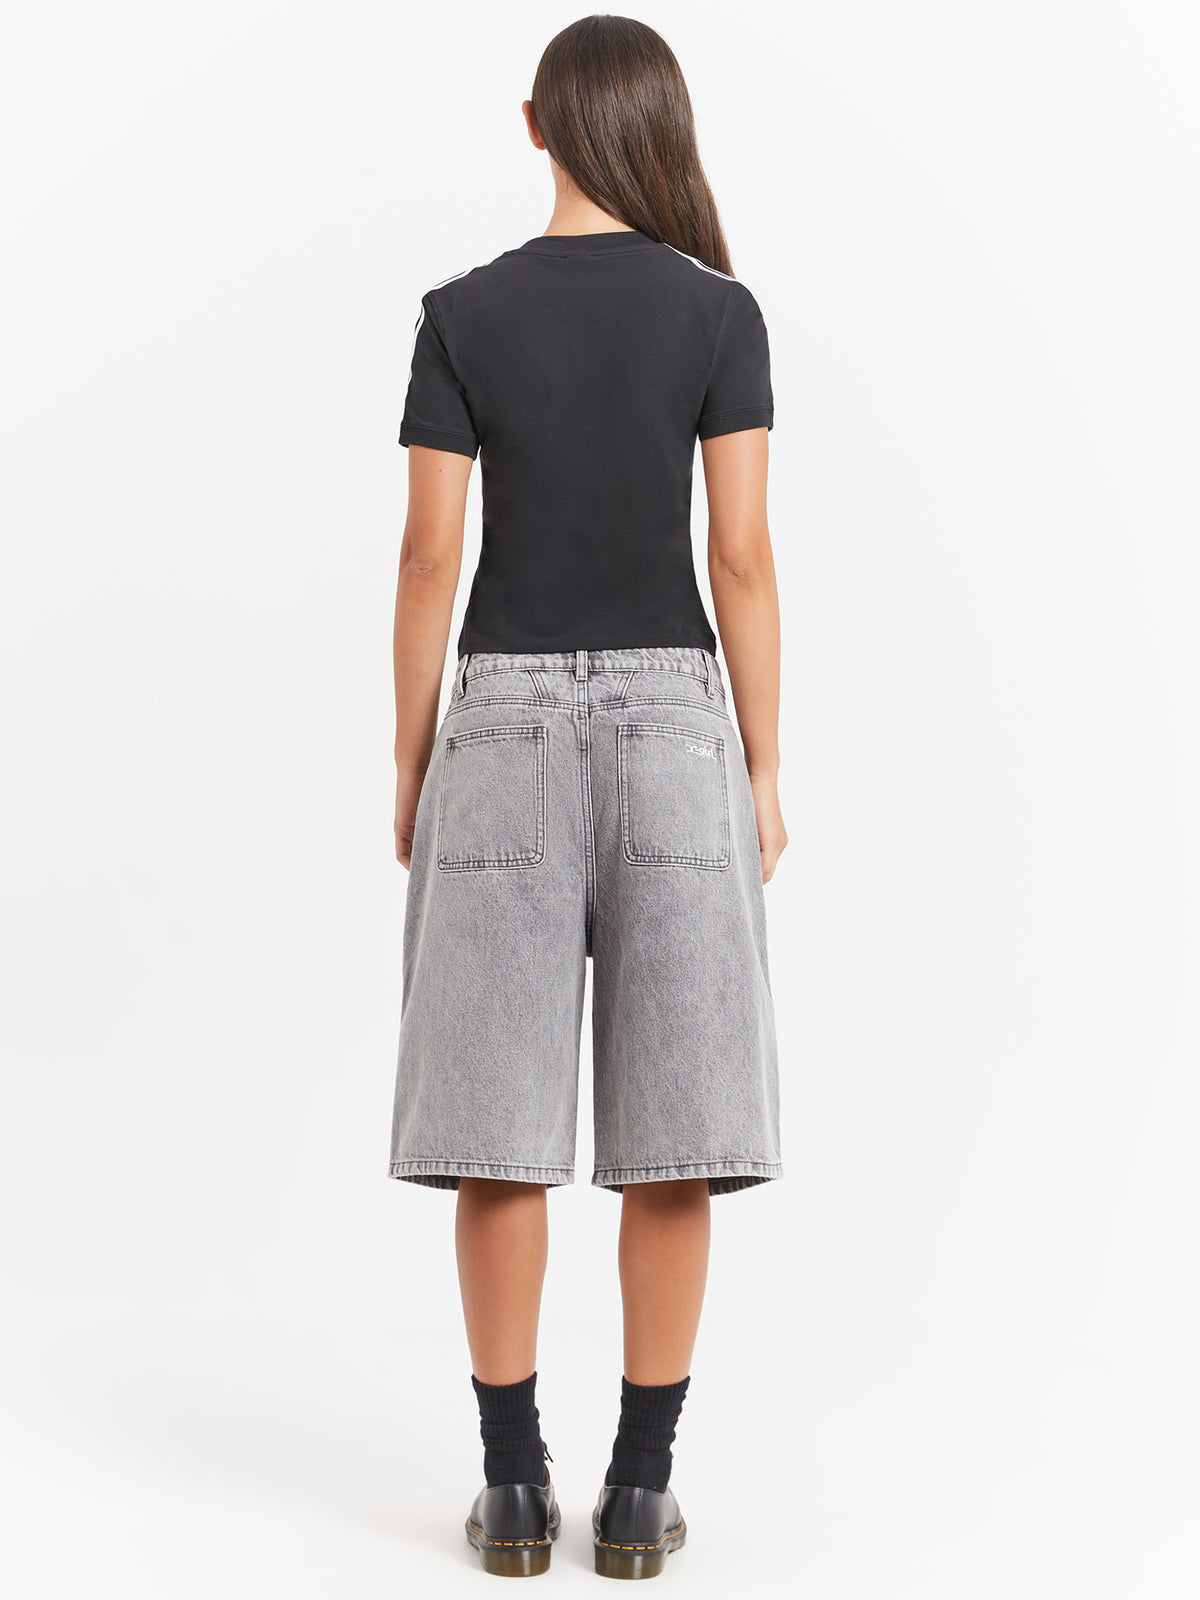 Mills Baggy Shorts in Washed Grey